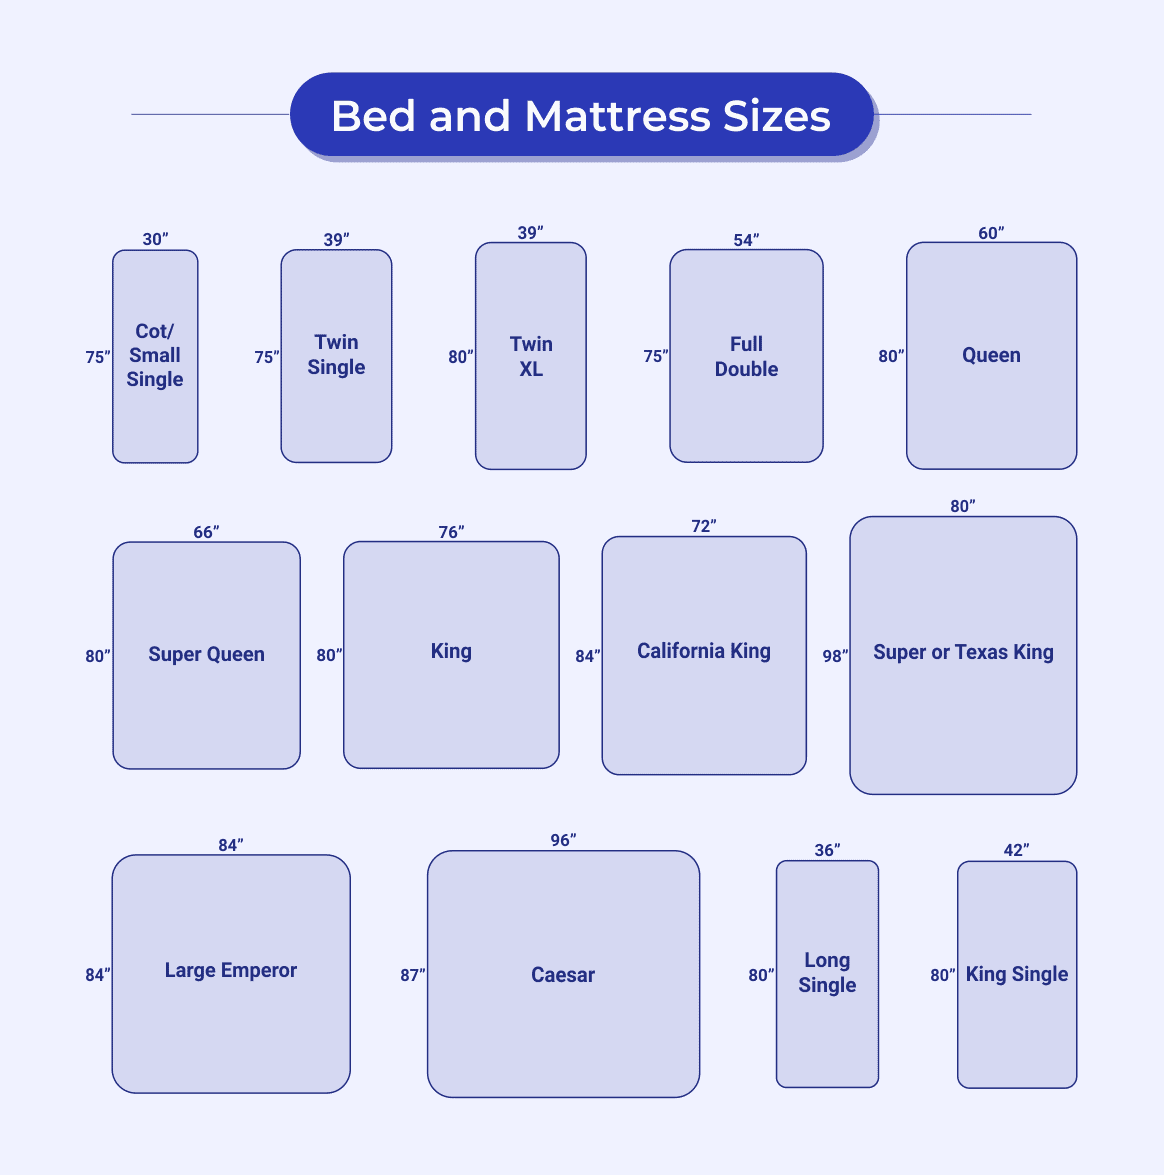 Mattress And Bed Sizes What Are The, What S The Width Of A King Size Bed In Cm